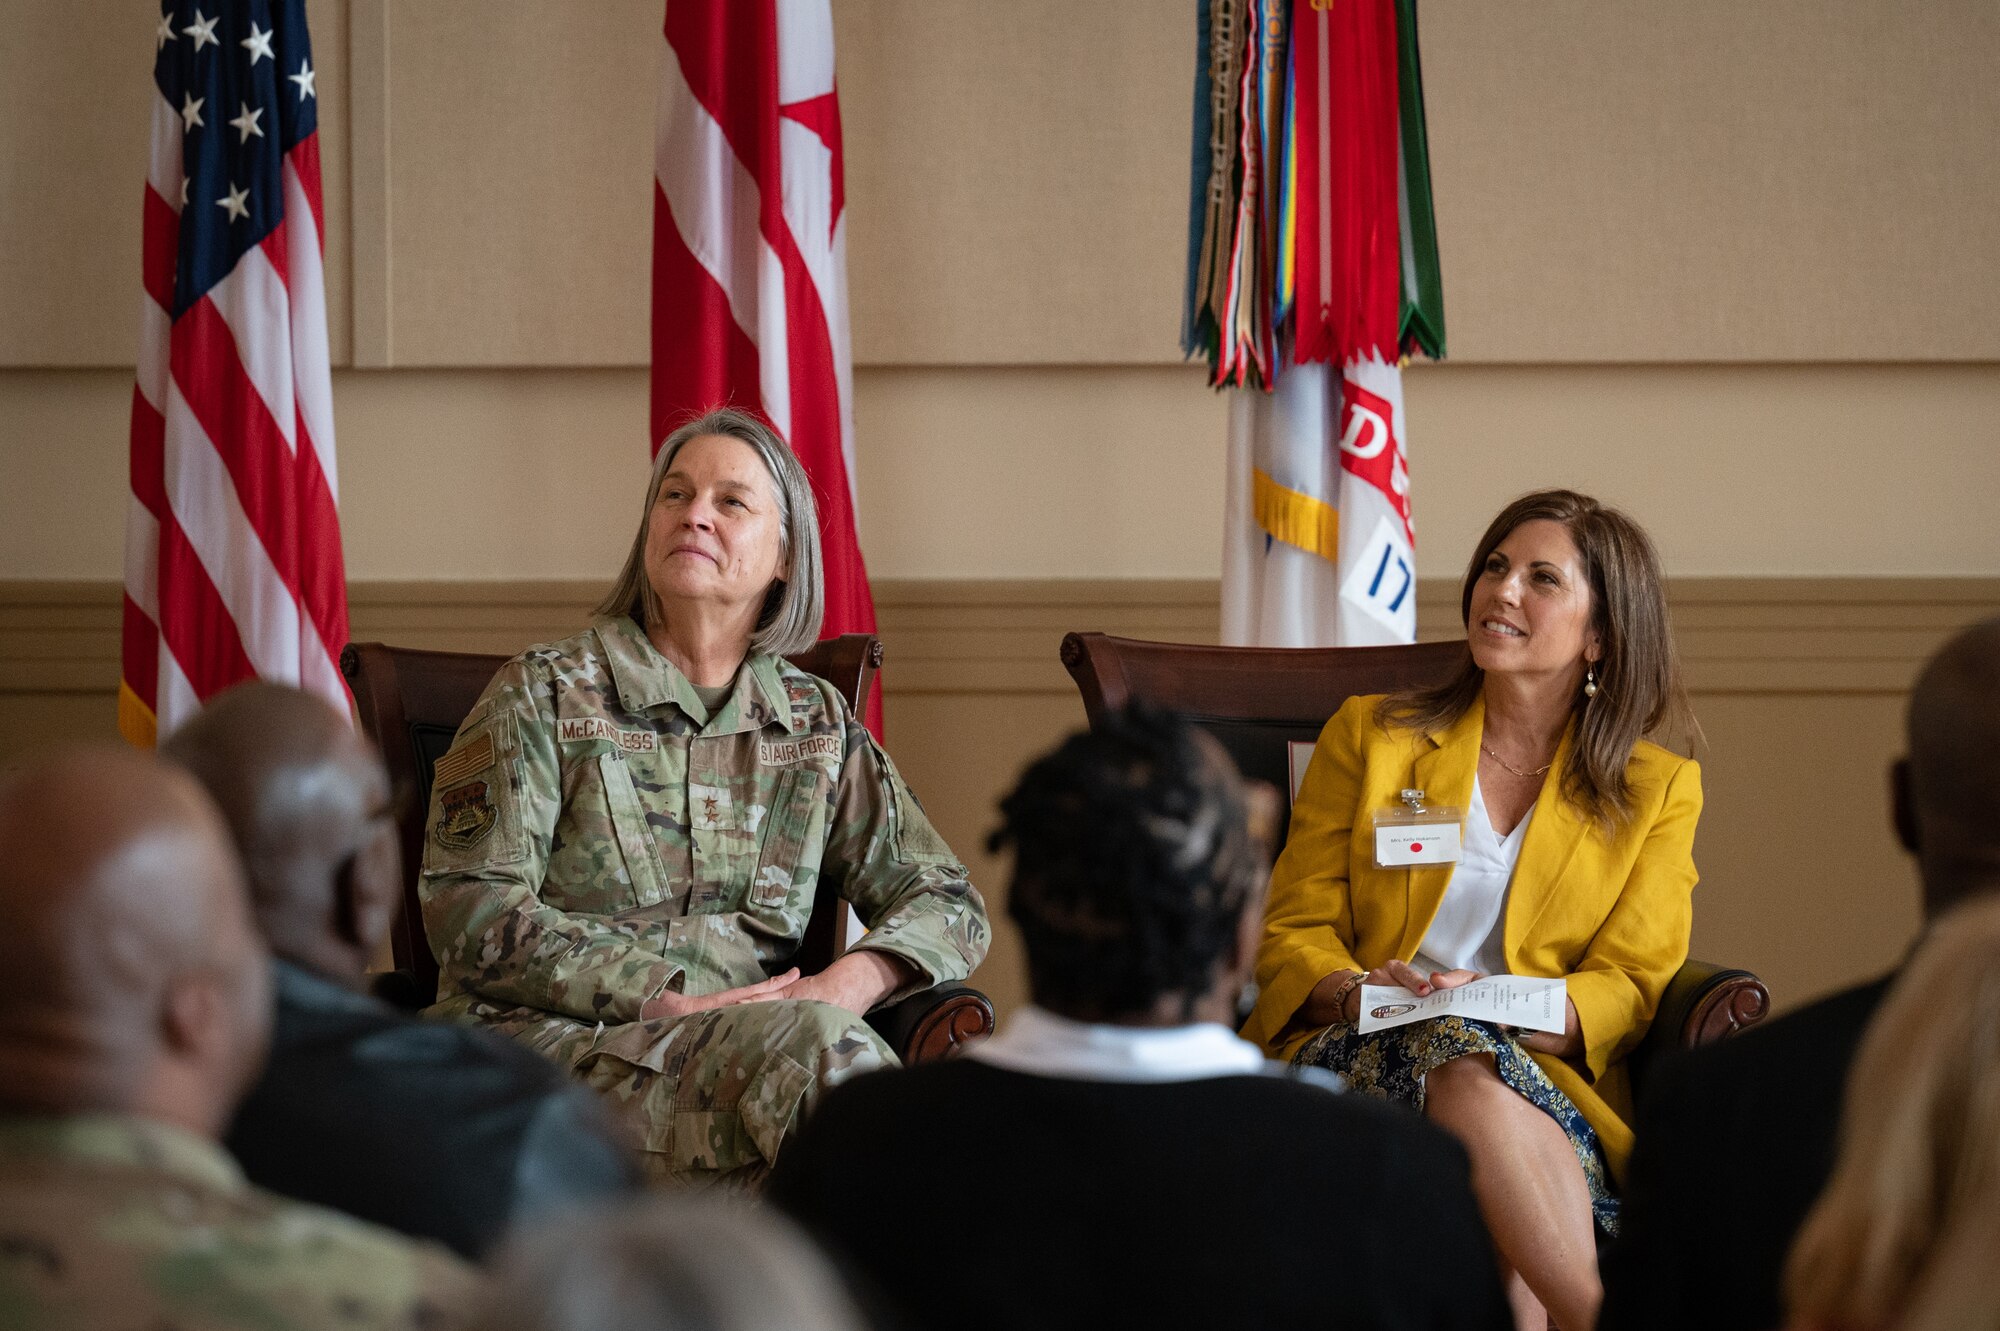 U.S. Air Force Maj. Gen. Sherrie L. McCandless, left, commanding general, District of Columbia National Guard, and Kelly Hokanson, spouse of the chief of the National Guard Bureau, watch a video at the District of Columbia Armory in Washington Feb. 9, 2023. Hokanson and McCandless recognized the DCNG Family Readiness Program for supporting more than 26,000 Soldiers and Airmen during the Capitol Response.